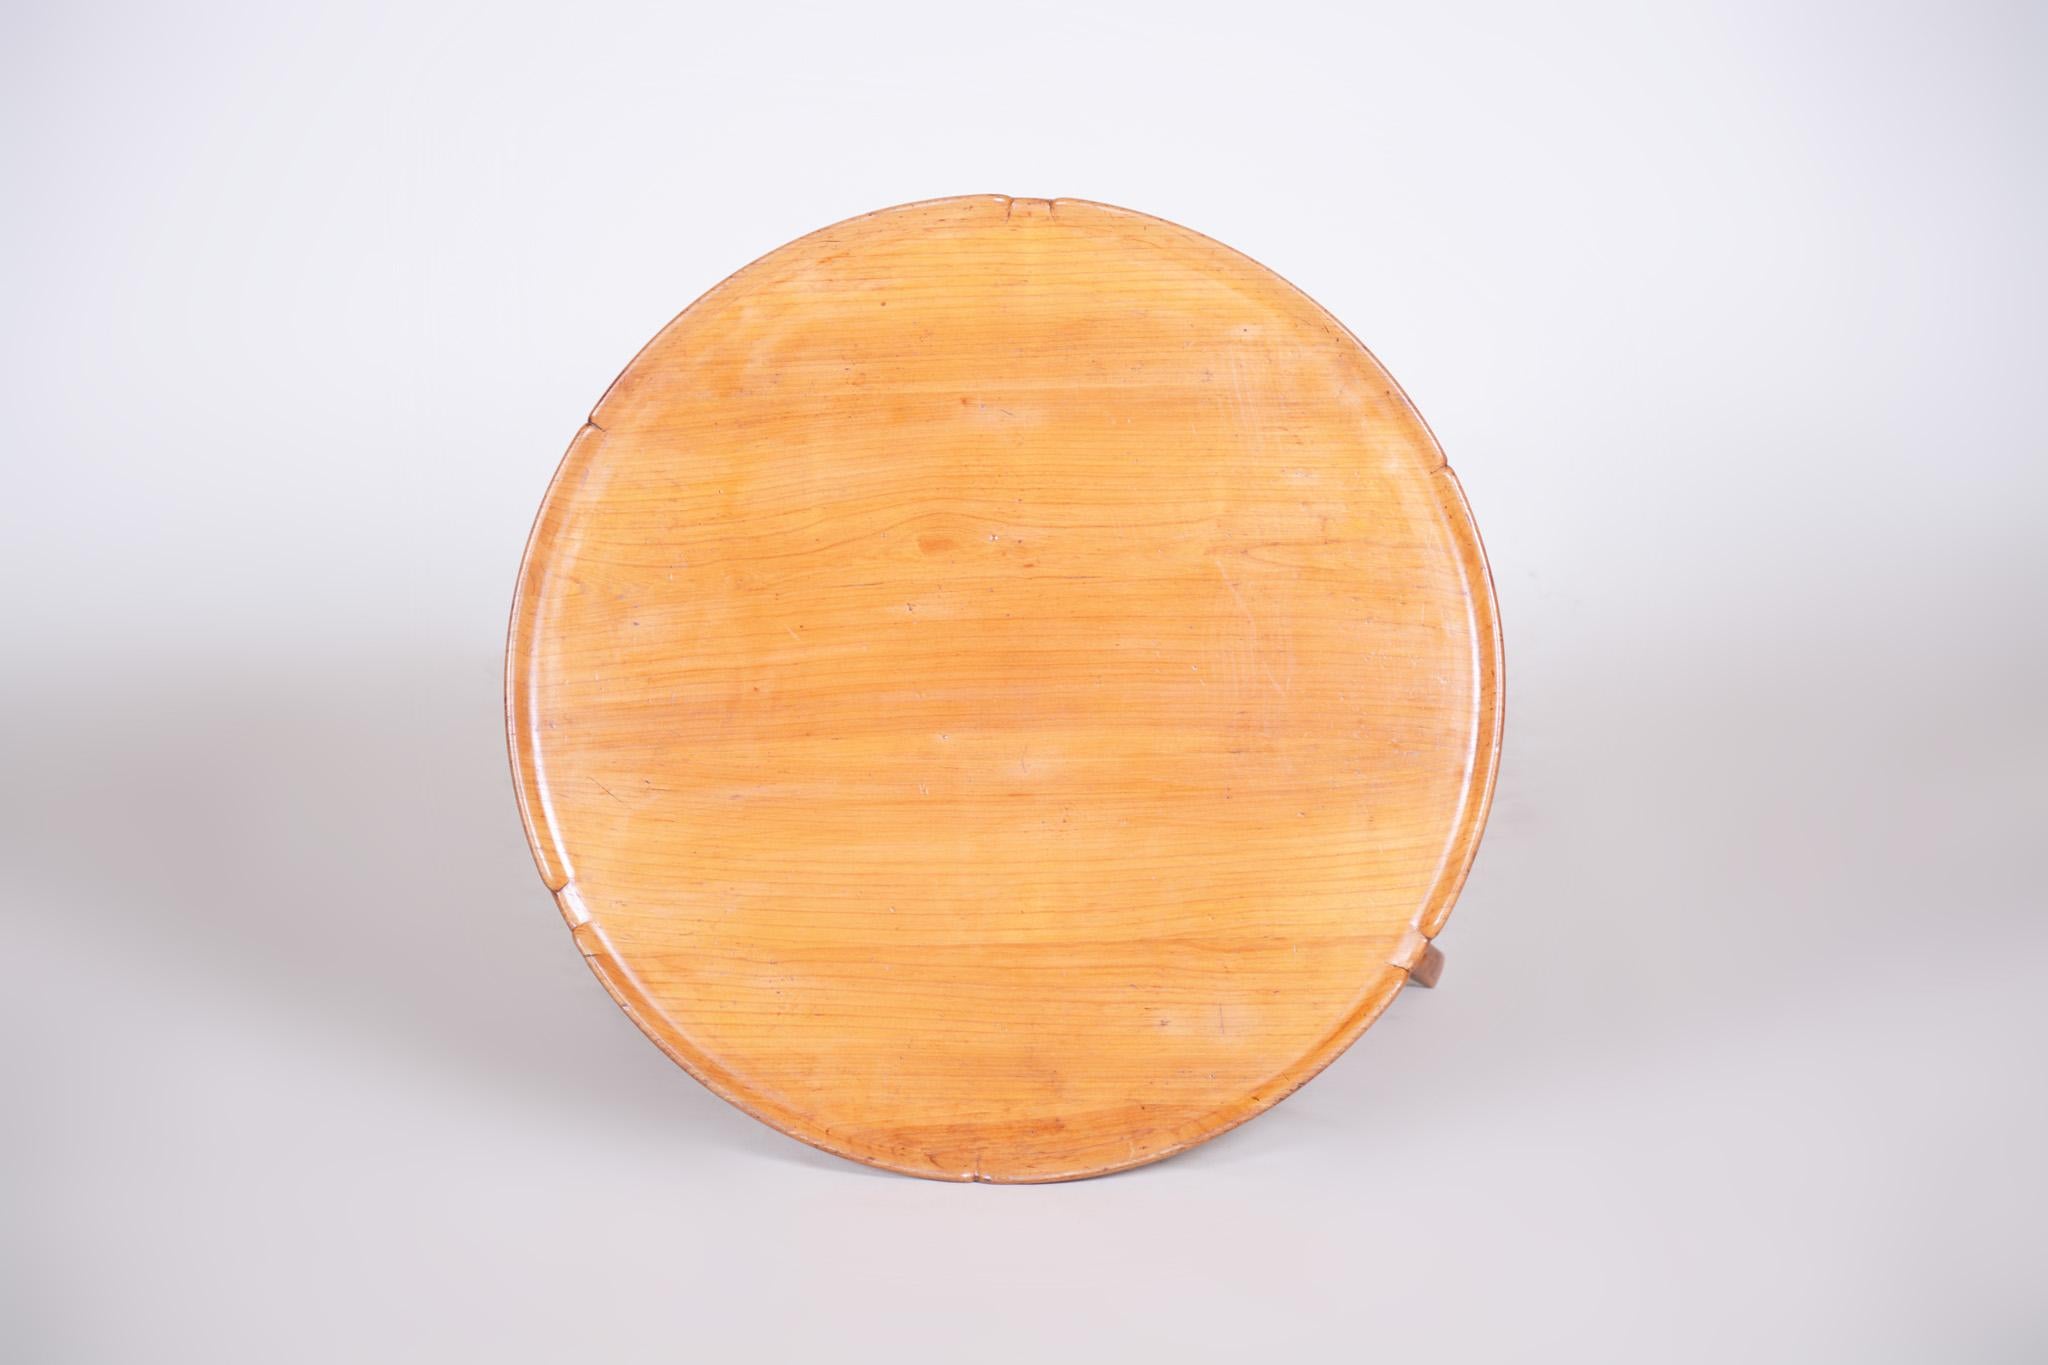 Mid-Century Modern Small Brown Round Table, Czech Midcentury, Made Out of Cherry Tree, 1940s For Sale